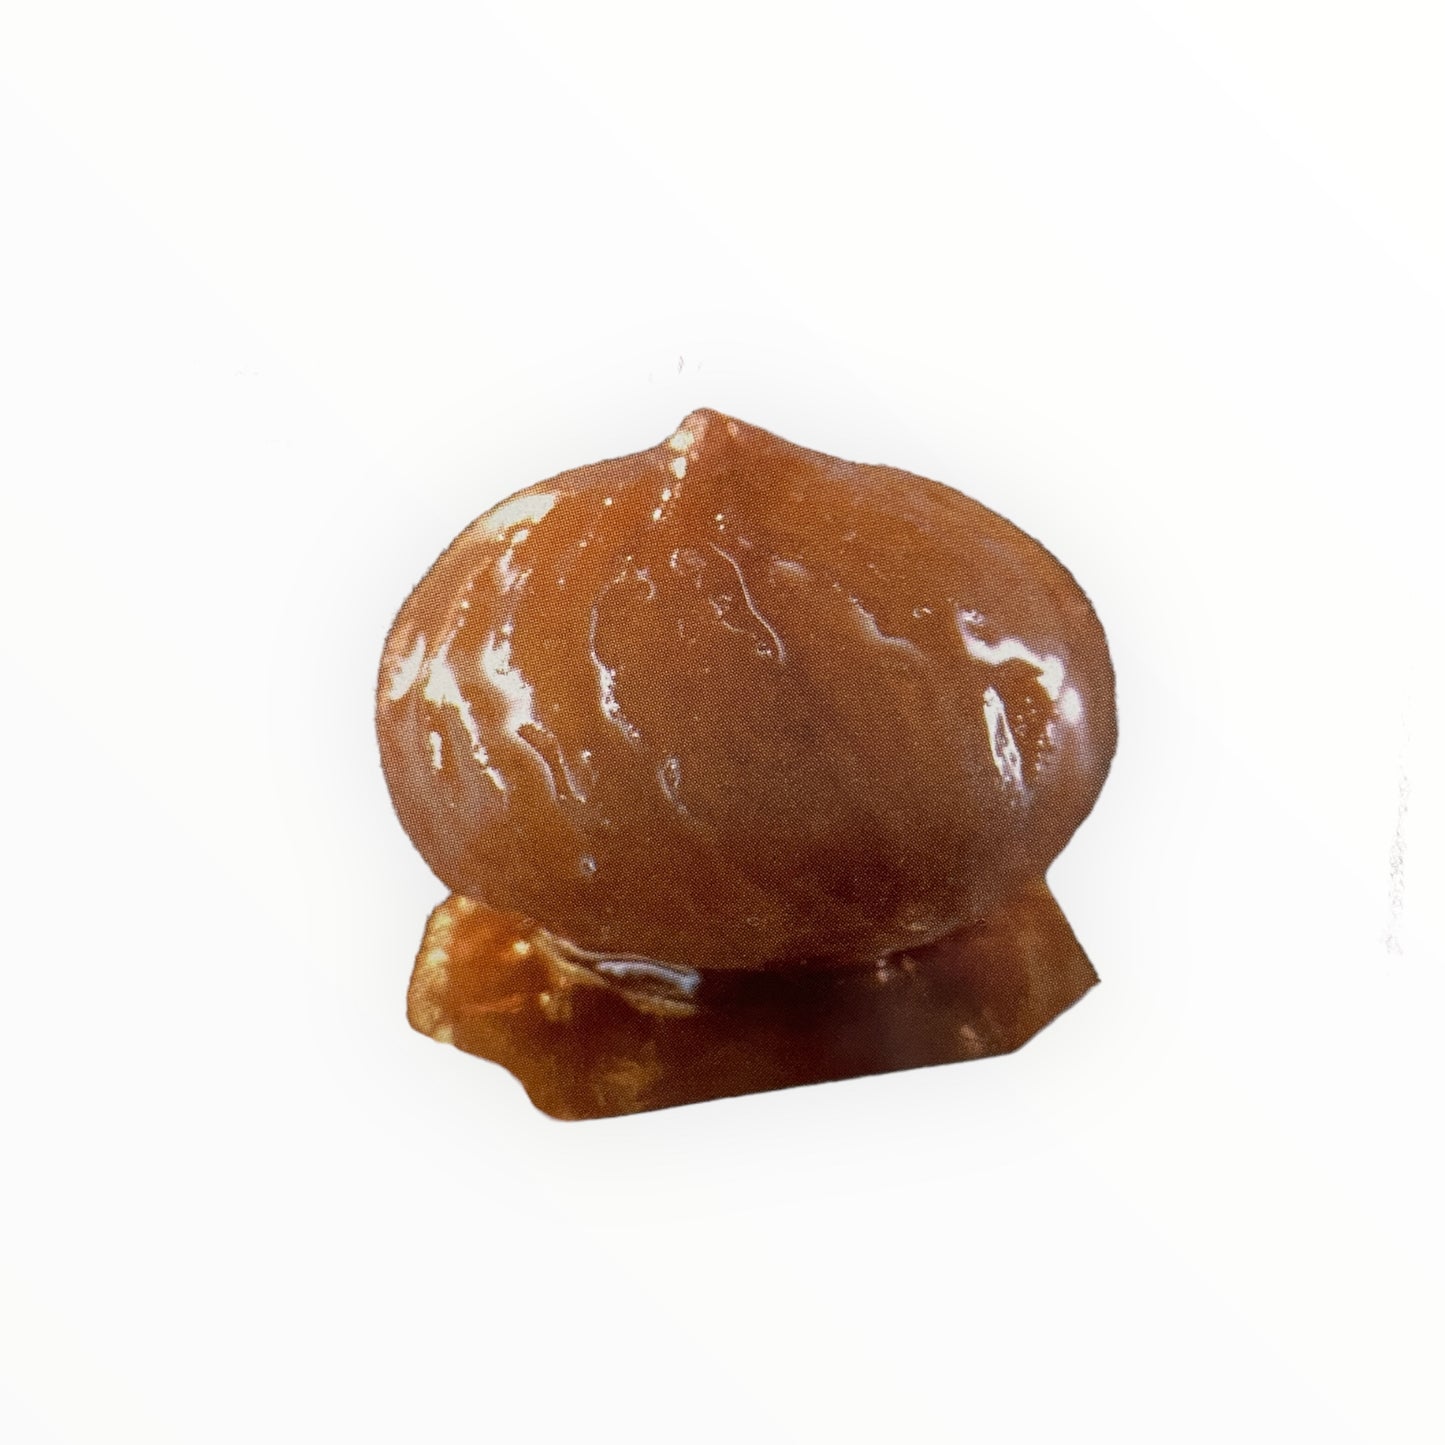 Candied Chestnuts Marrons Glaces by Corsiglia From France 8 Pcs